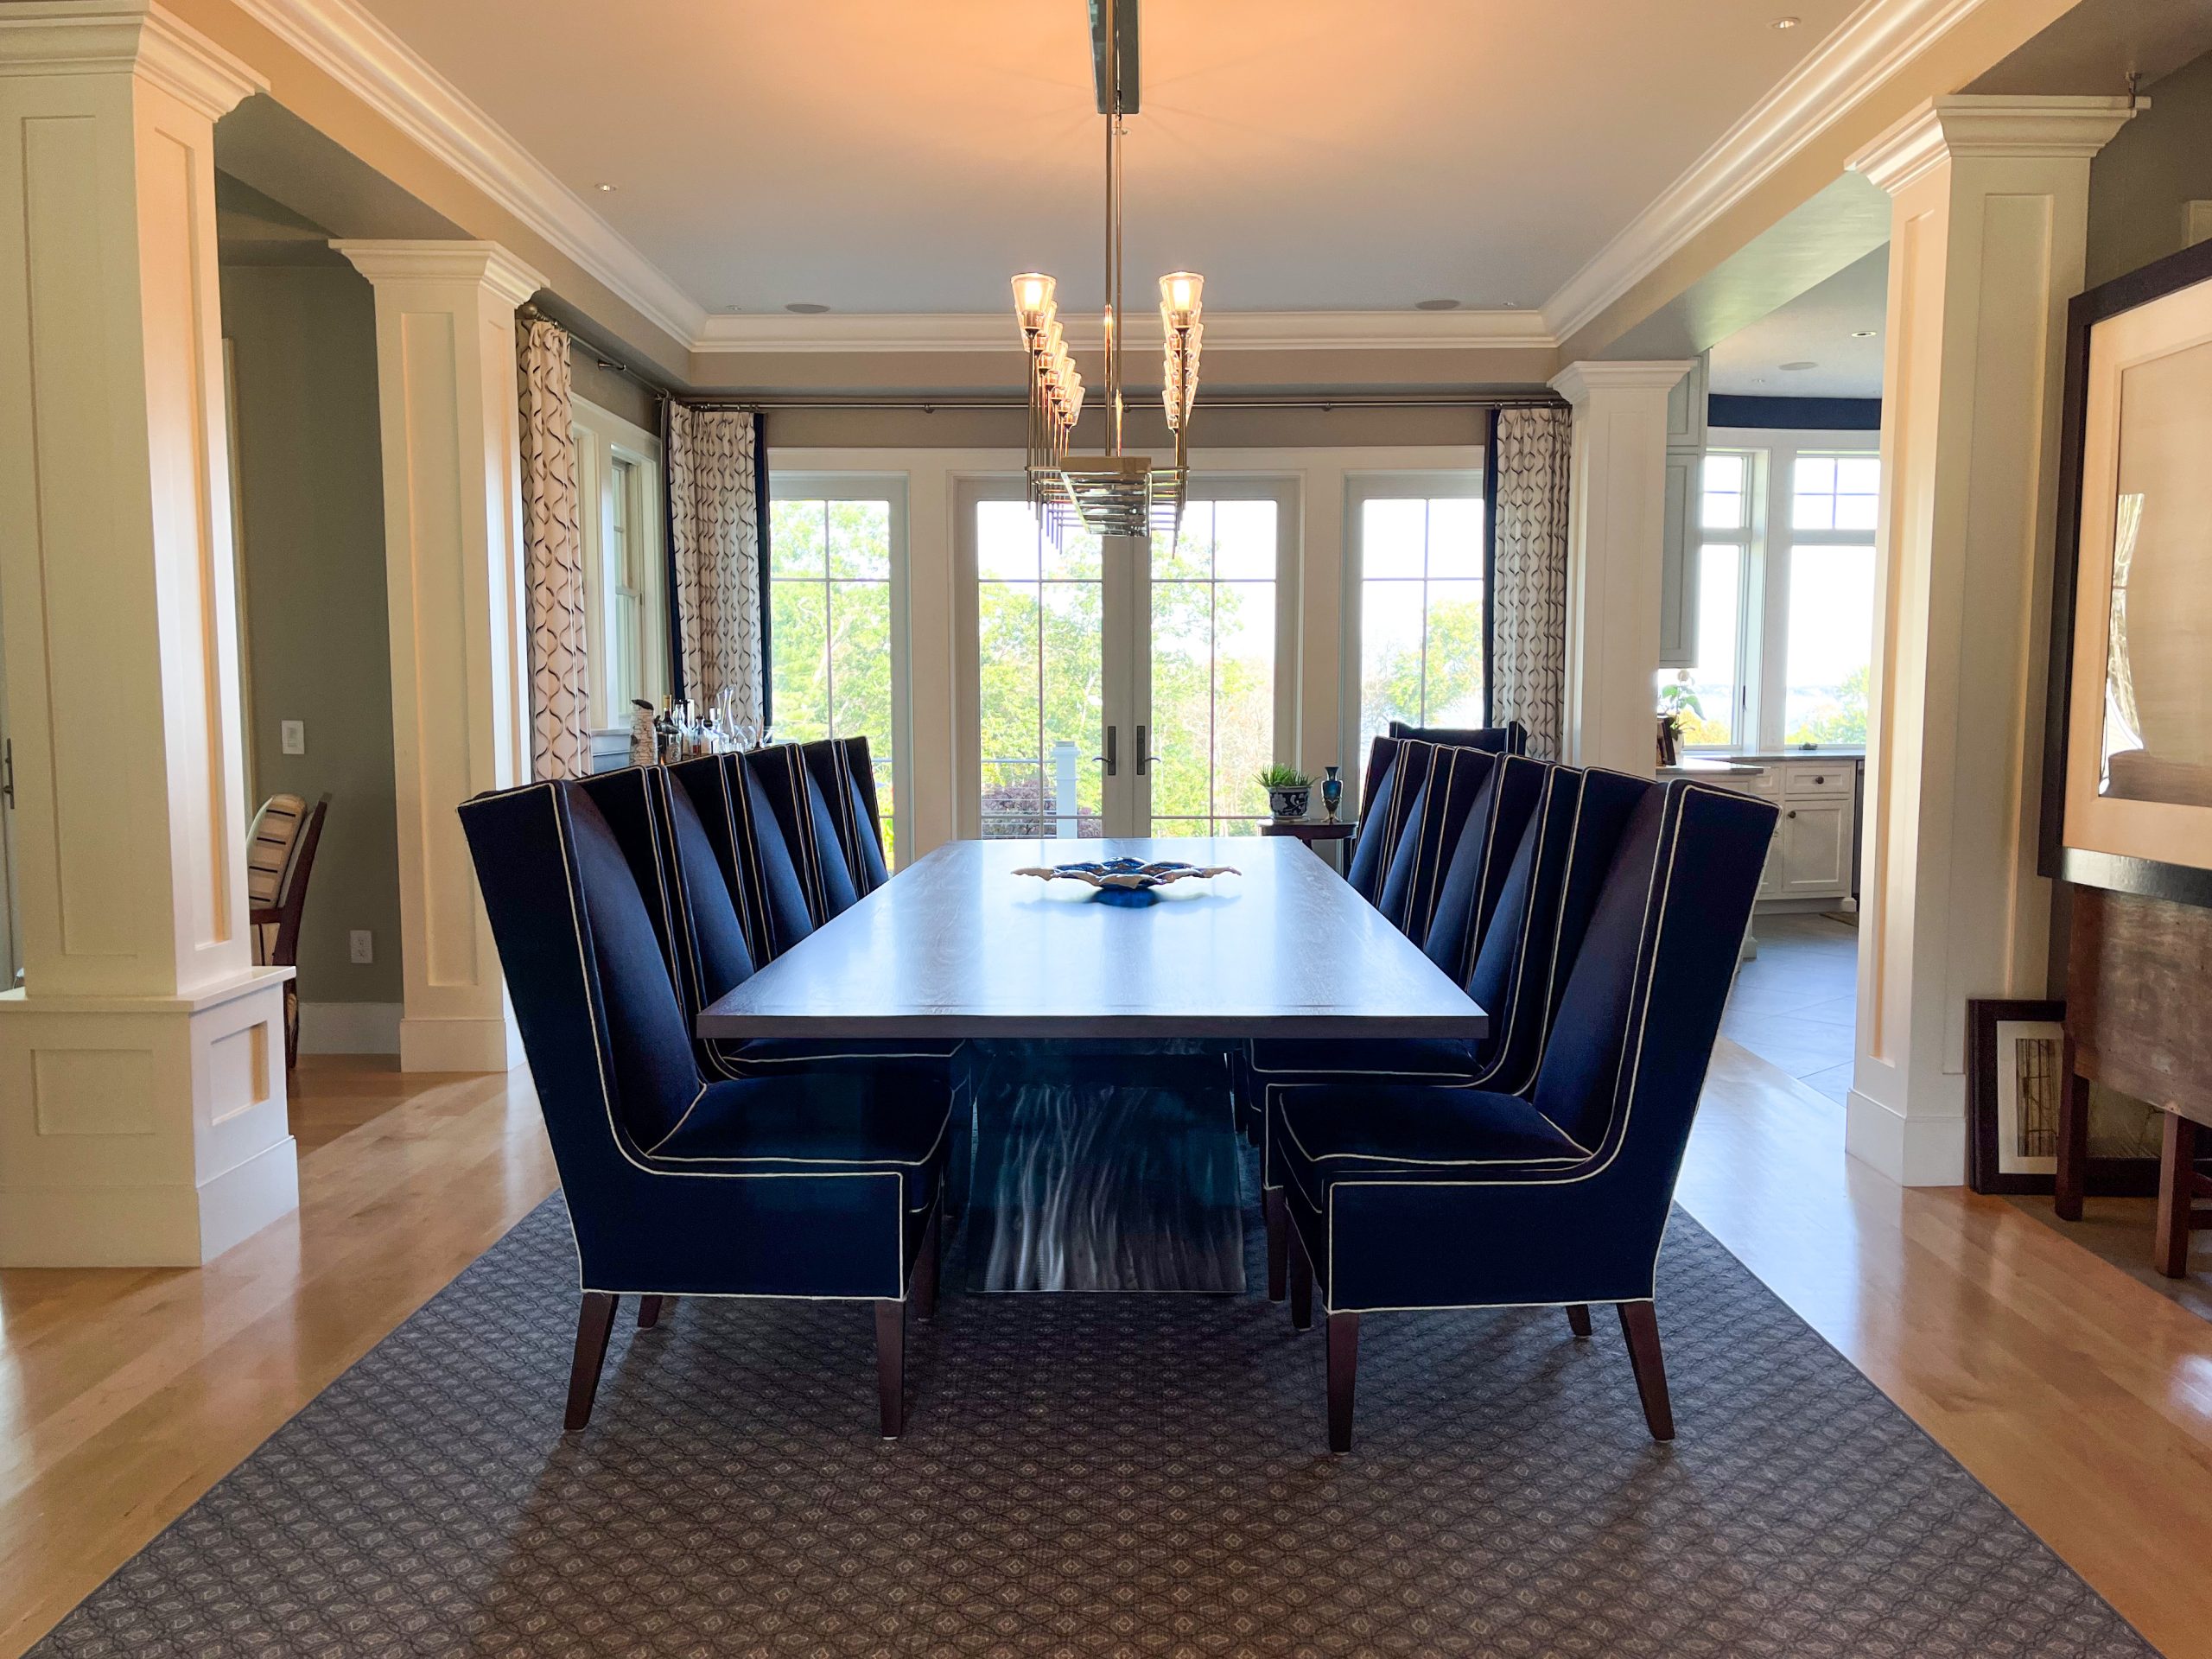 A dining room with a large rectangular table surrounded by high armchairs upholstered in Navy blue.